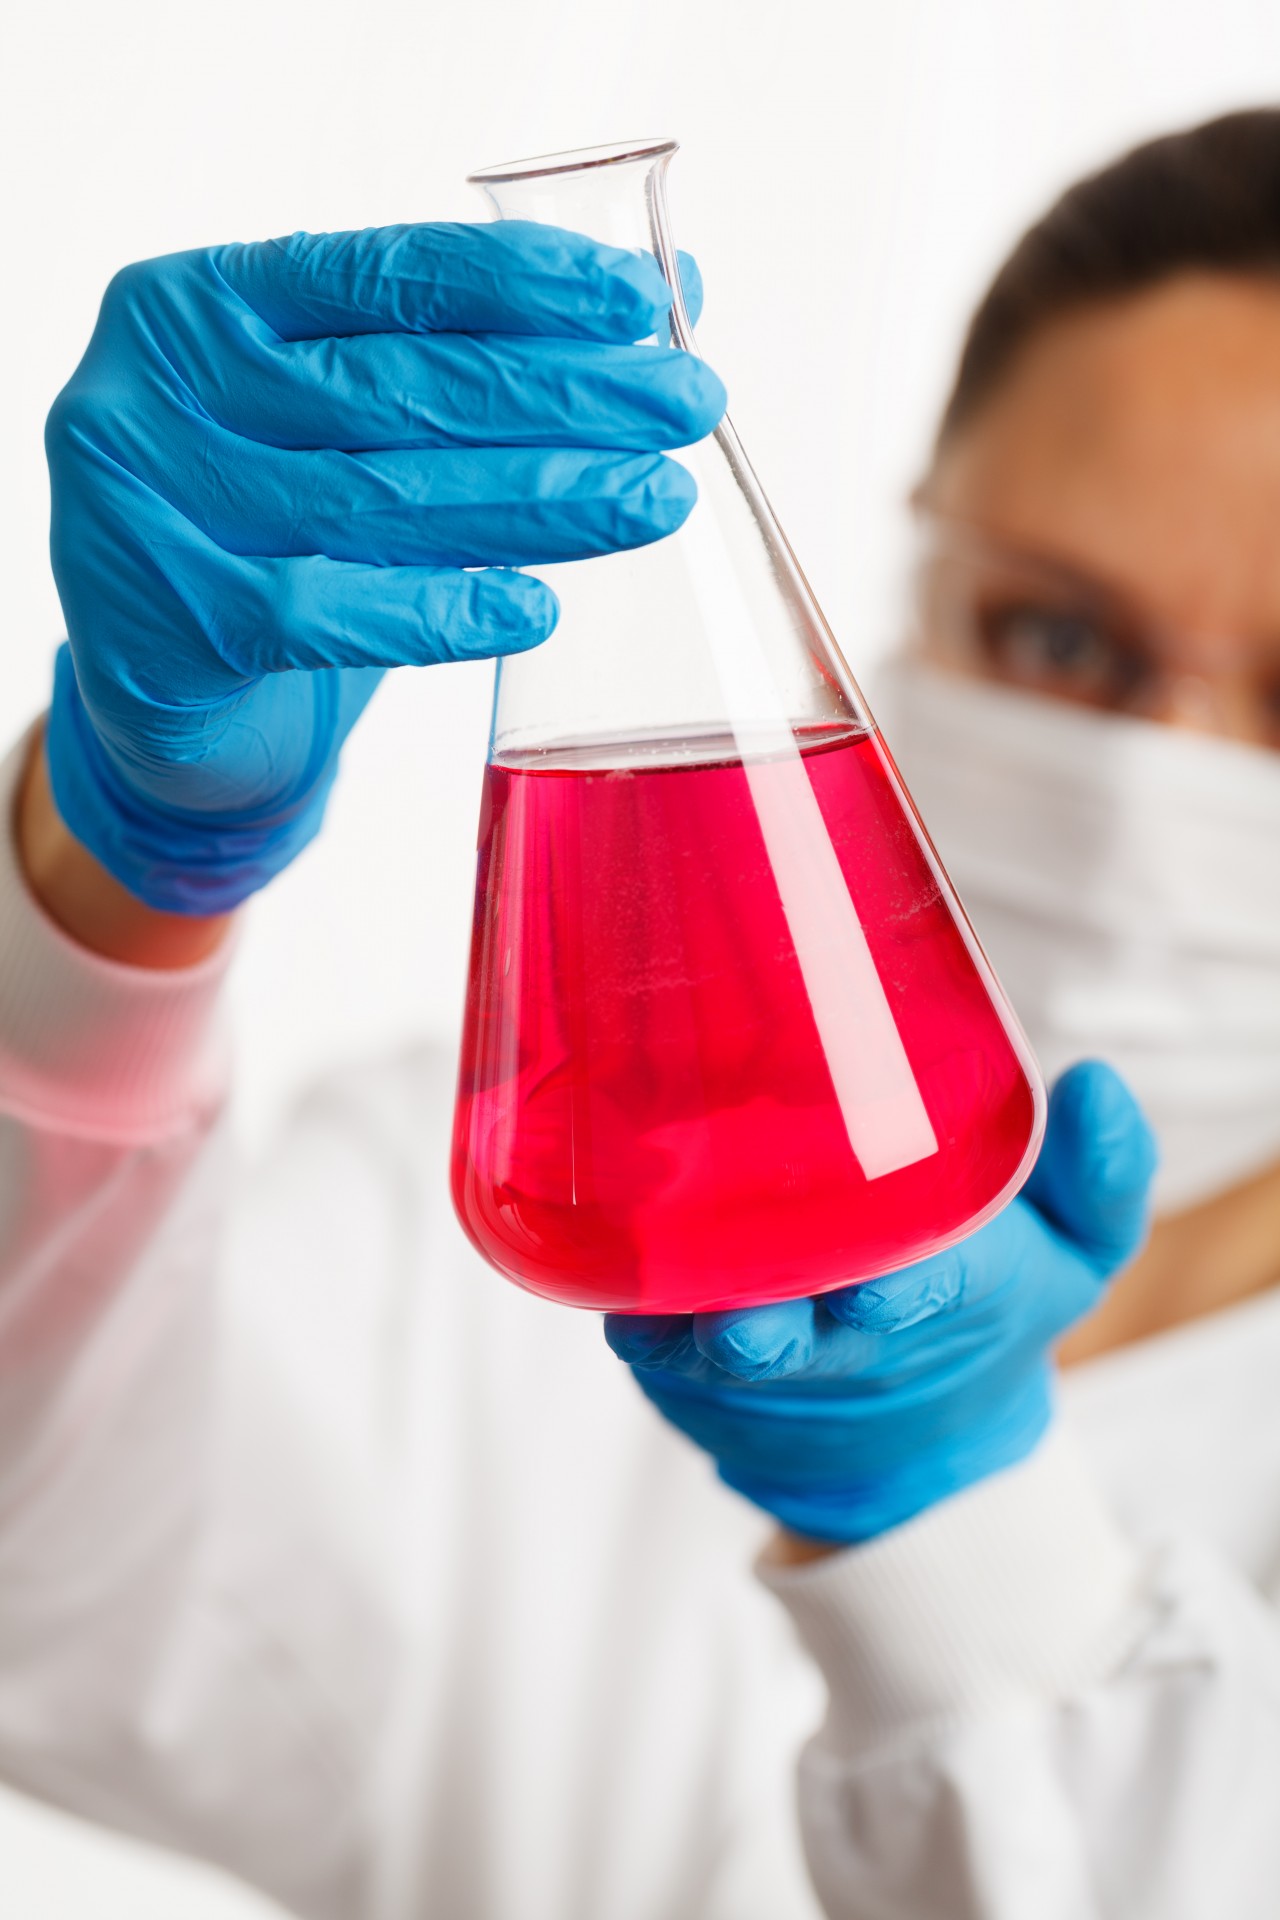 scientist holding an Erlenmeyer flask with pink liquid